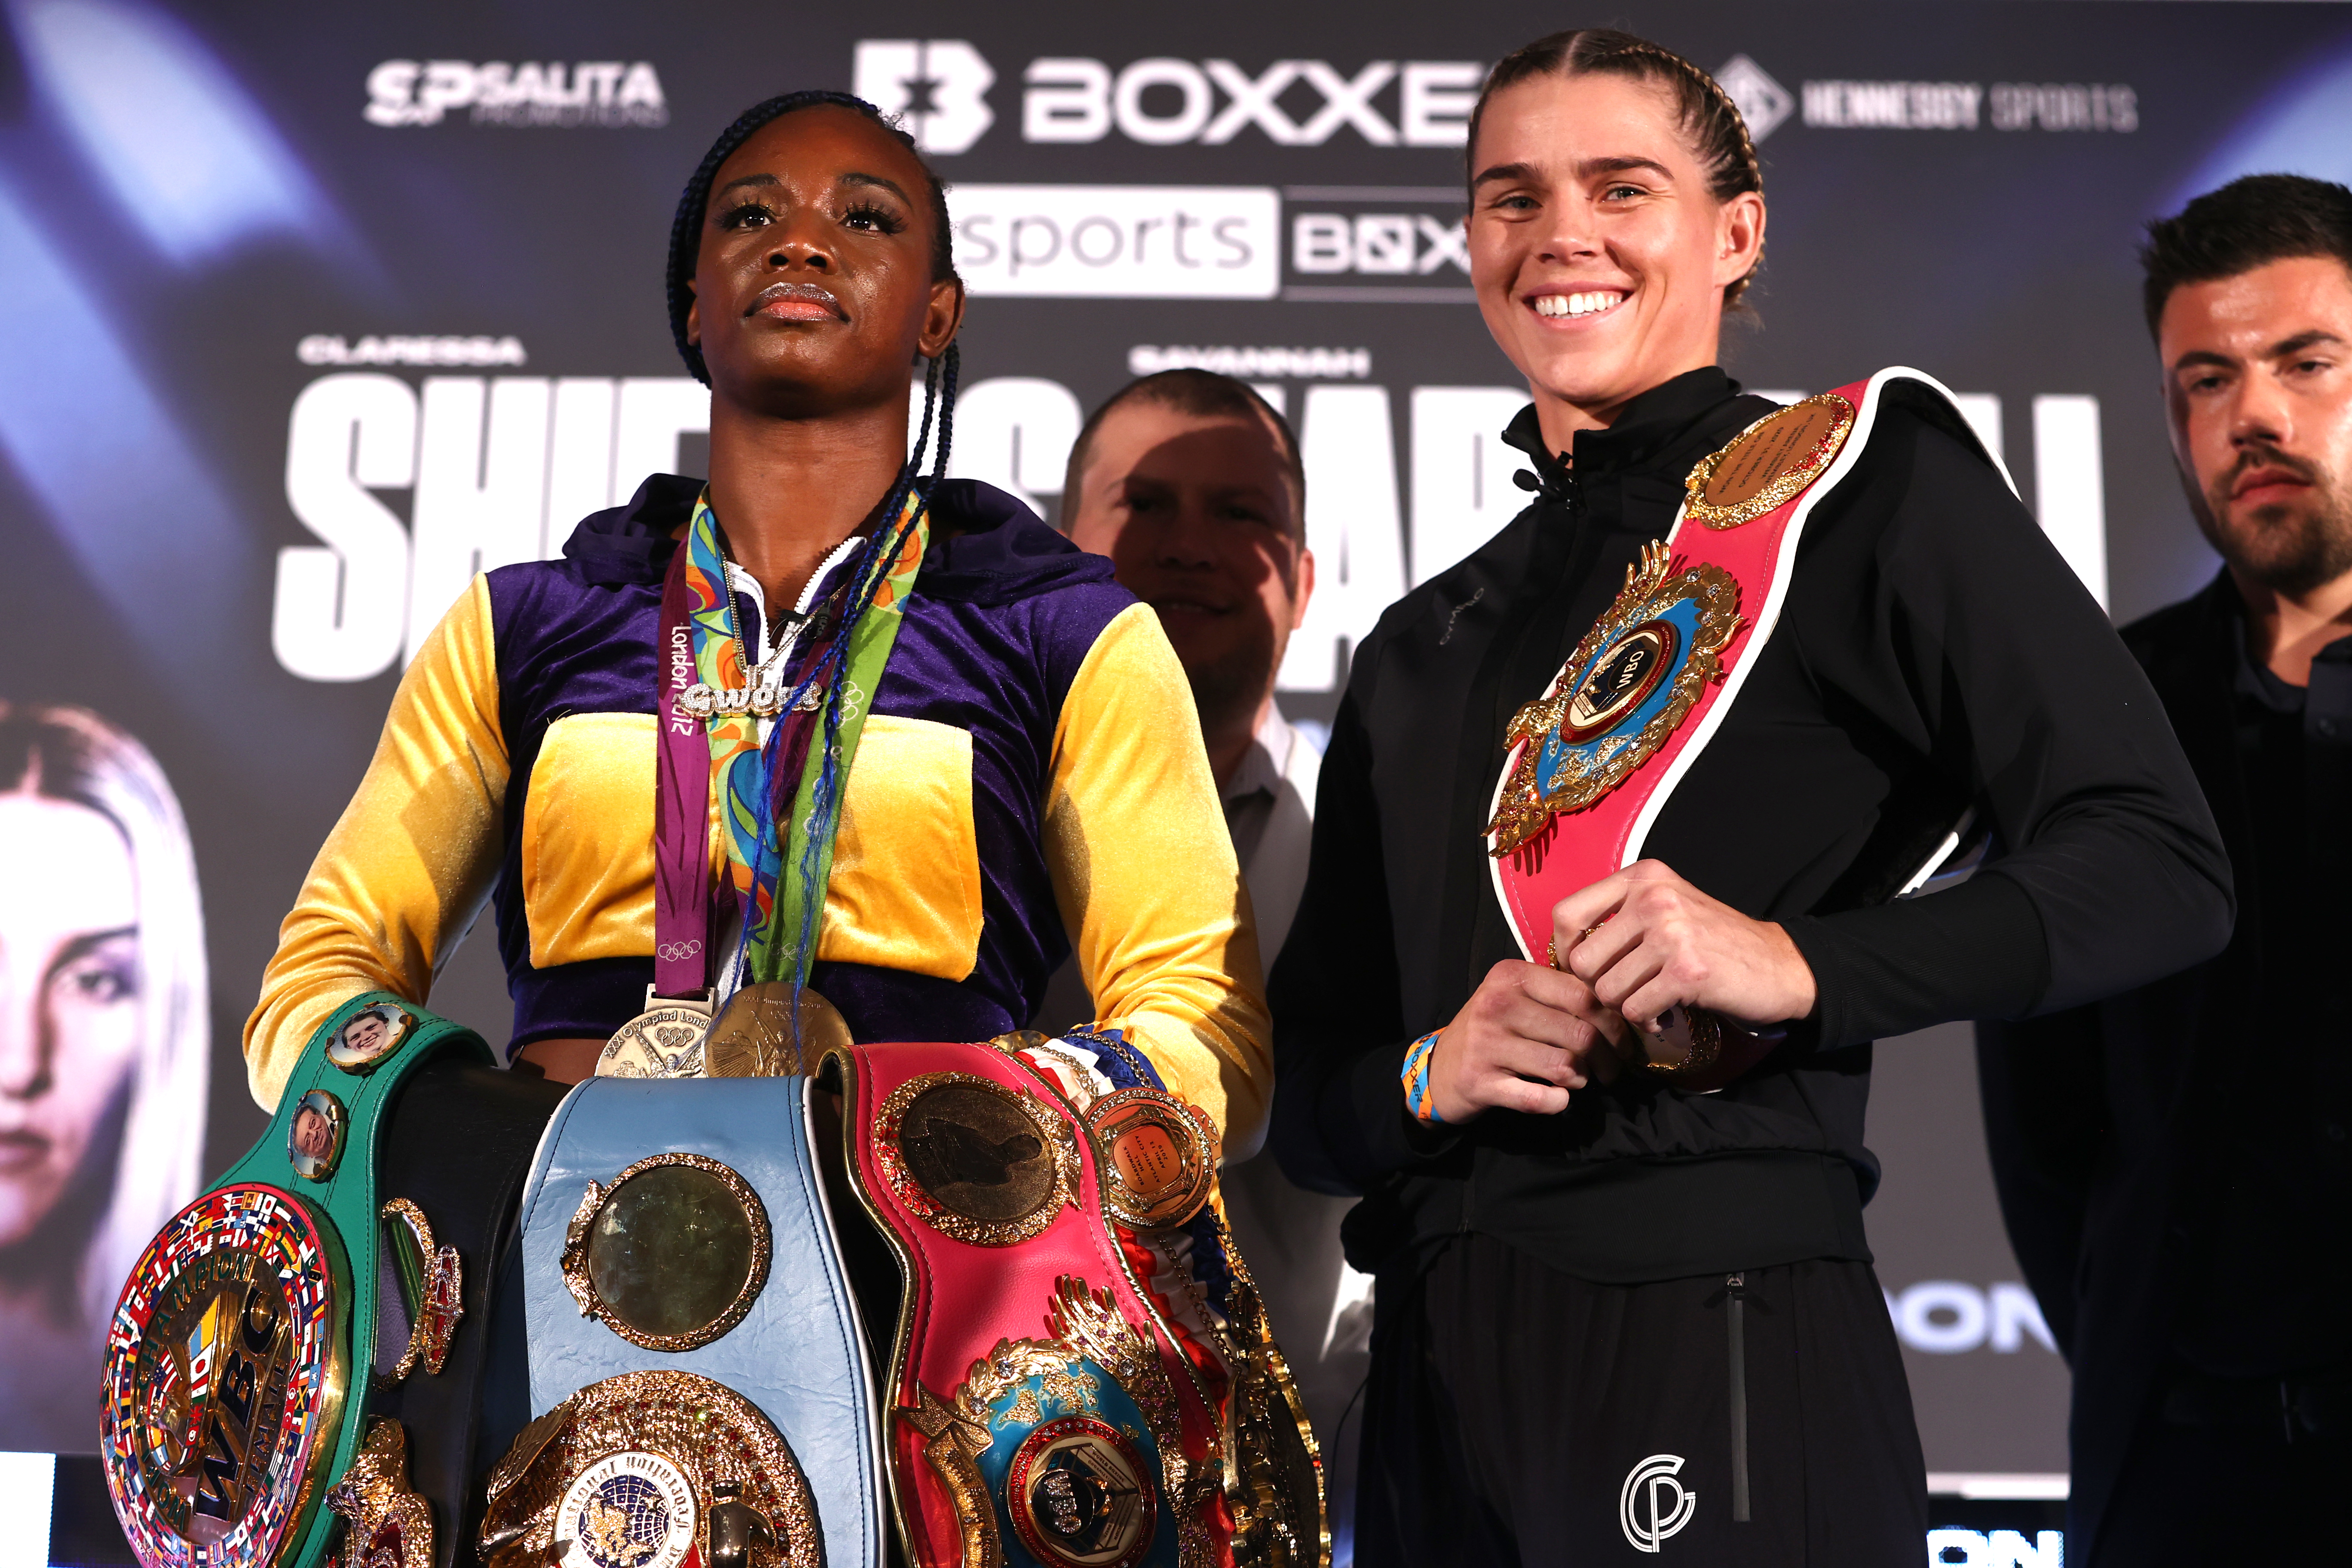 Claressa Shields vs Savannah Marshall is still slated to happen on Saturday after the Queen’s death